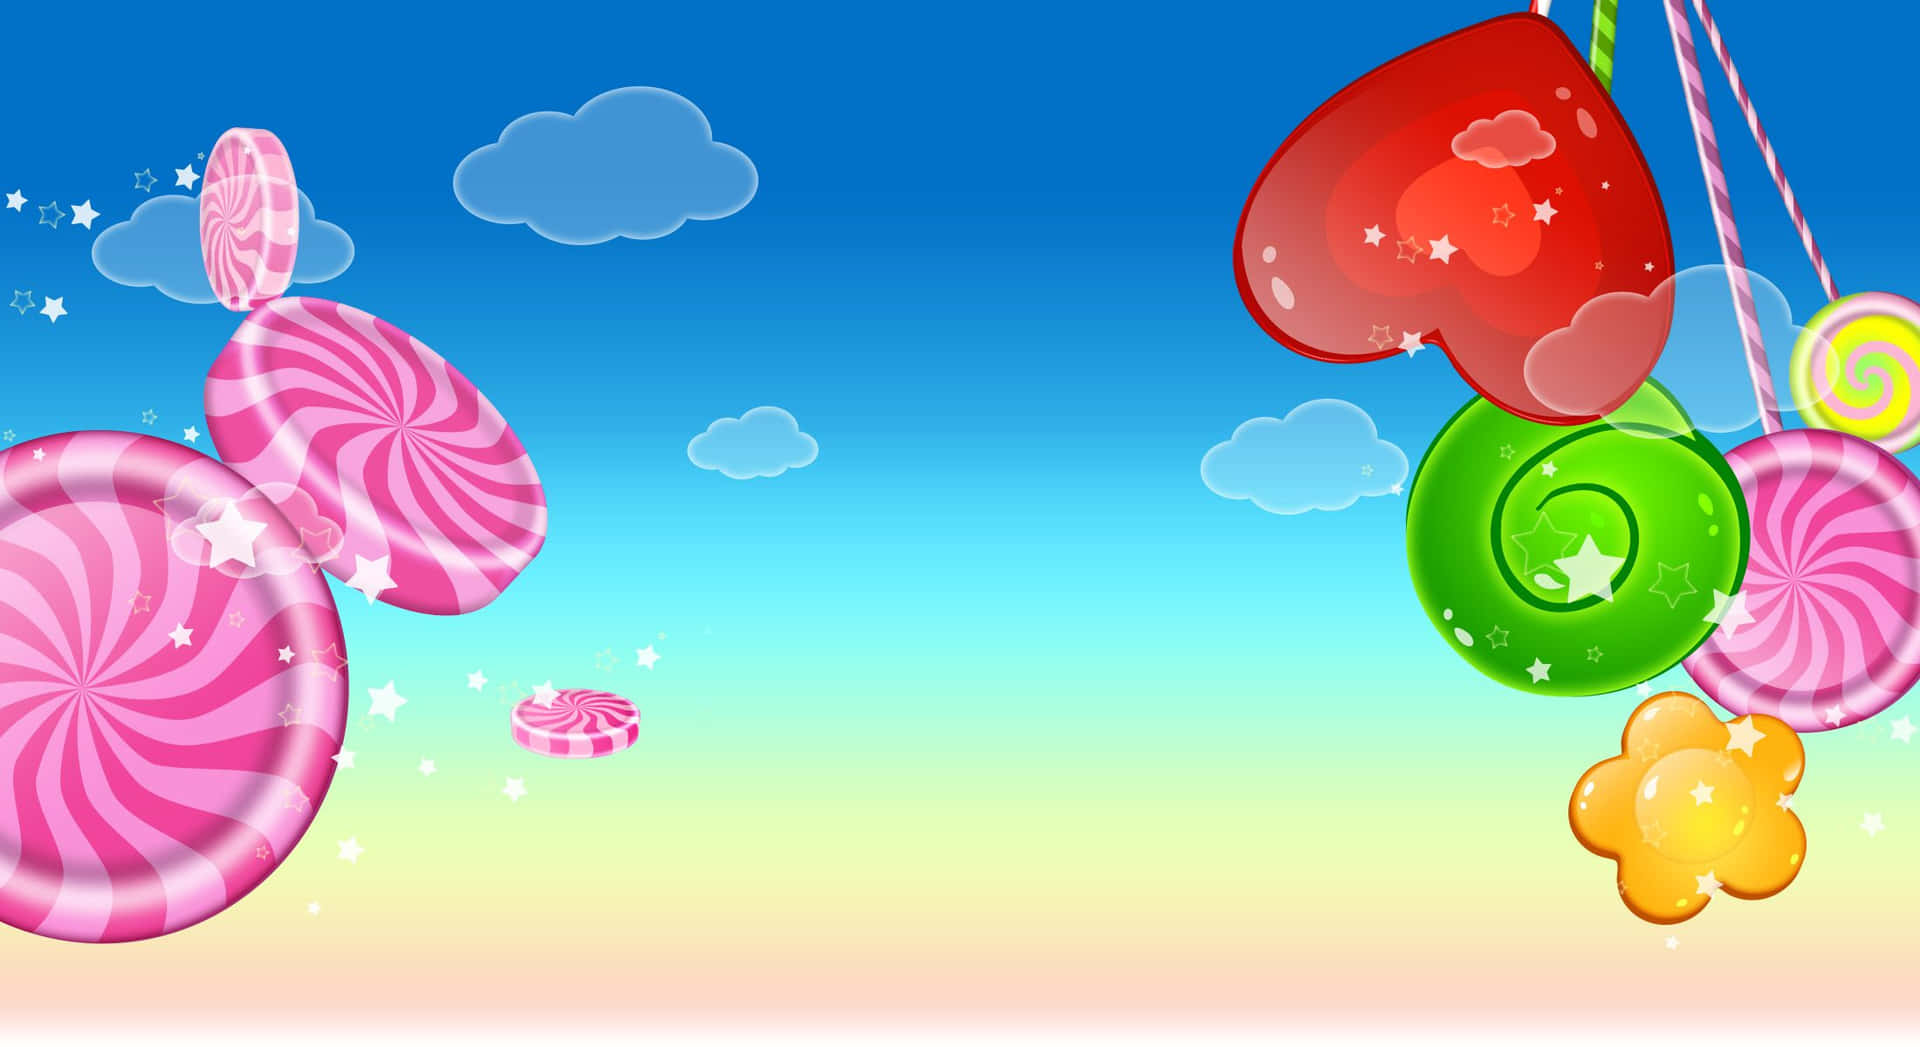 A Colorful Background With Candy Canes And Clouds